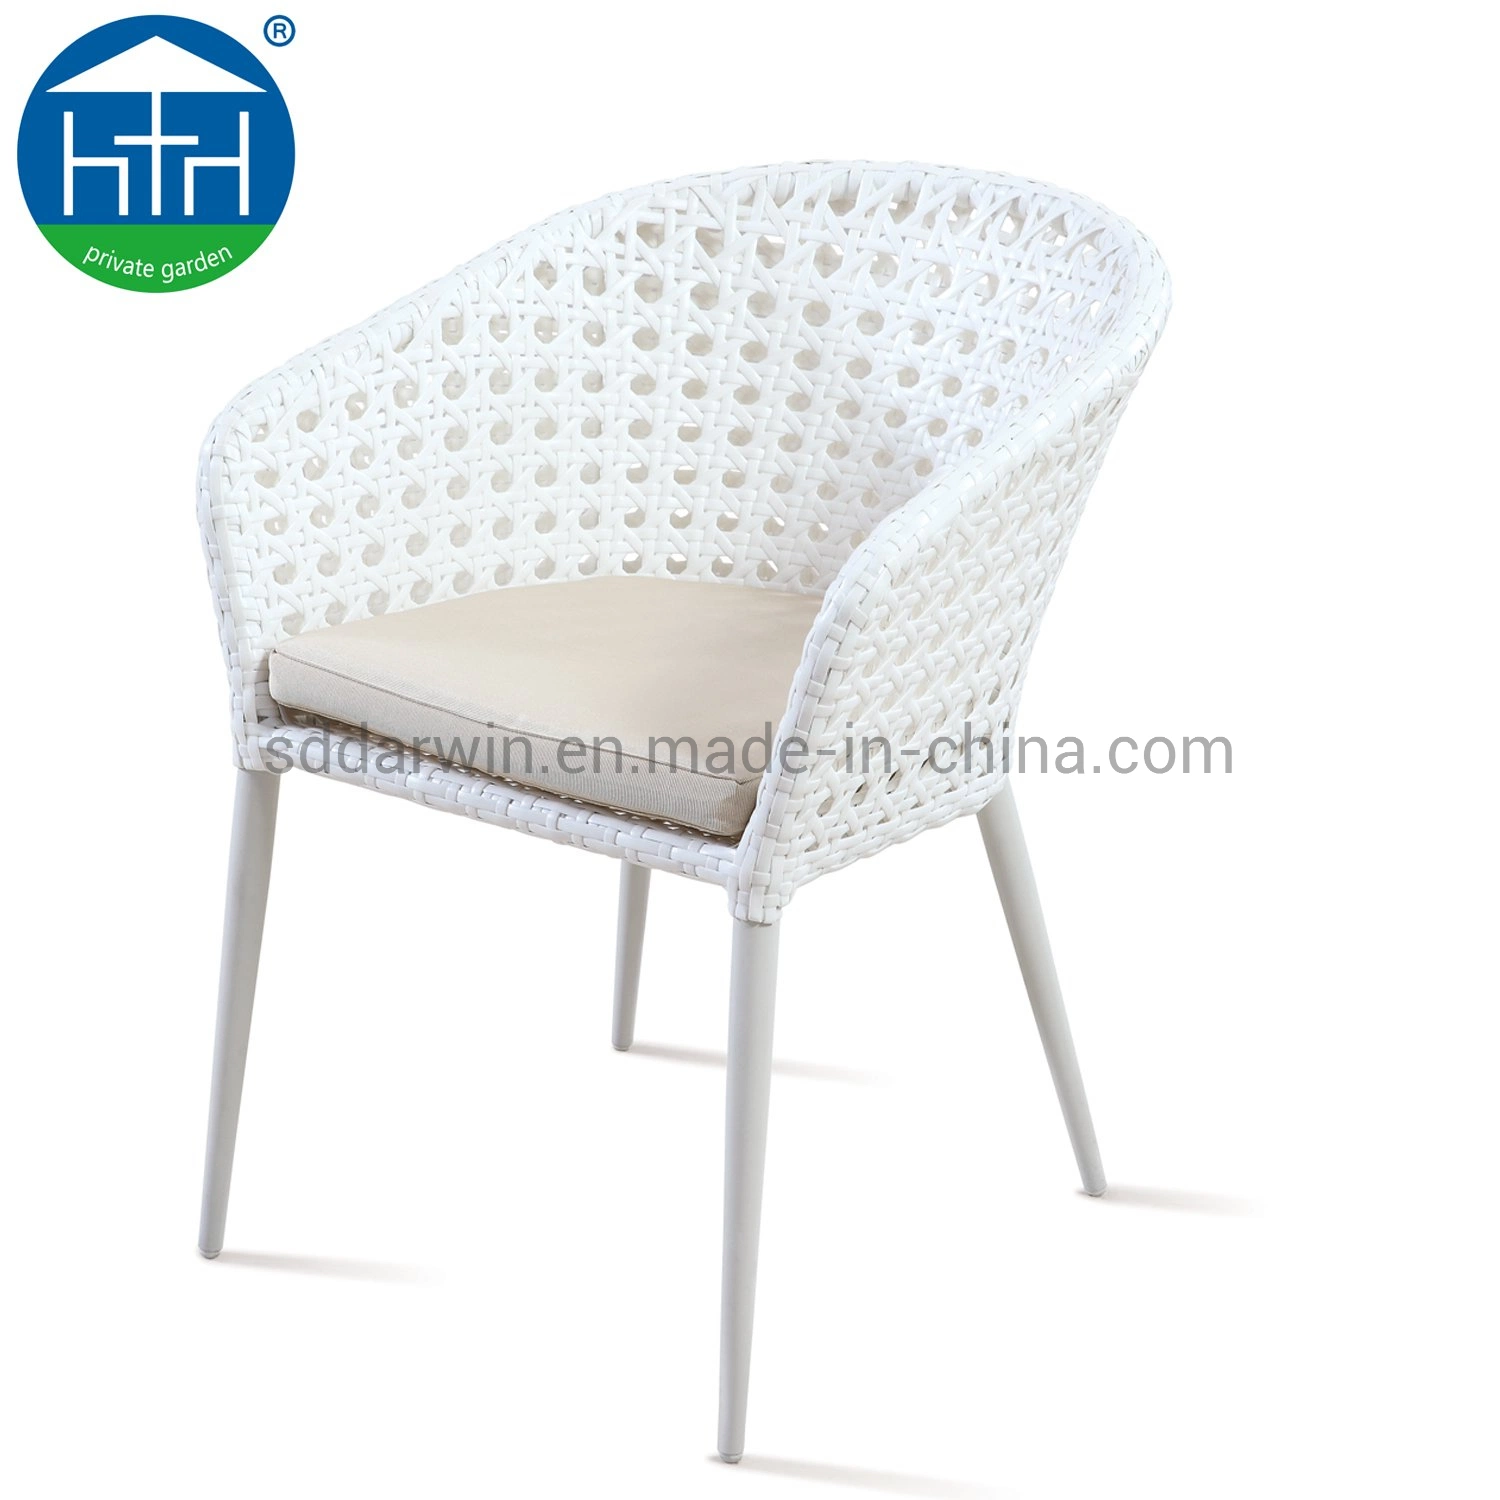 Outdoor Garden Furniture PE Rattan Wicker Balcony Seating Chair and Table